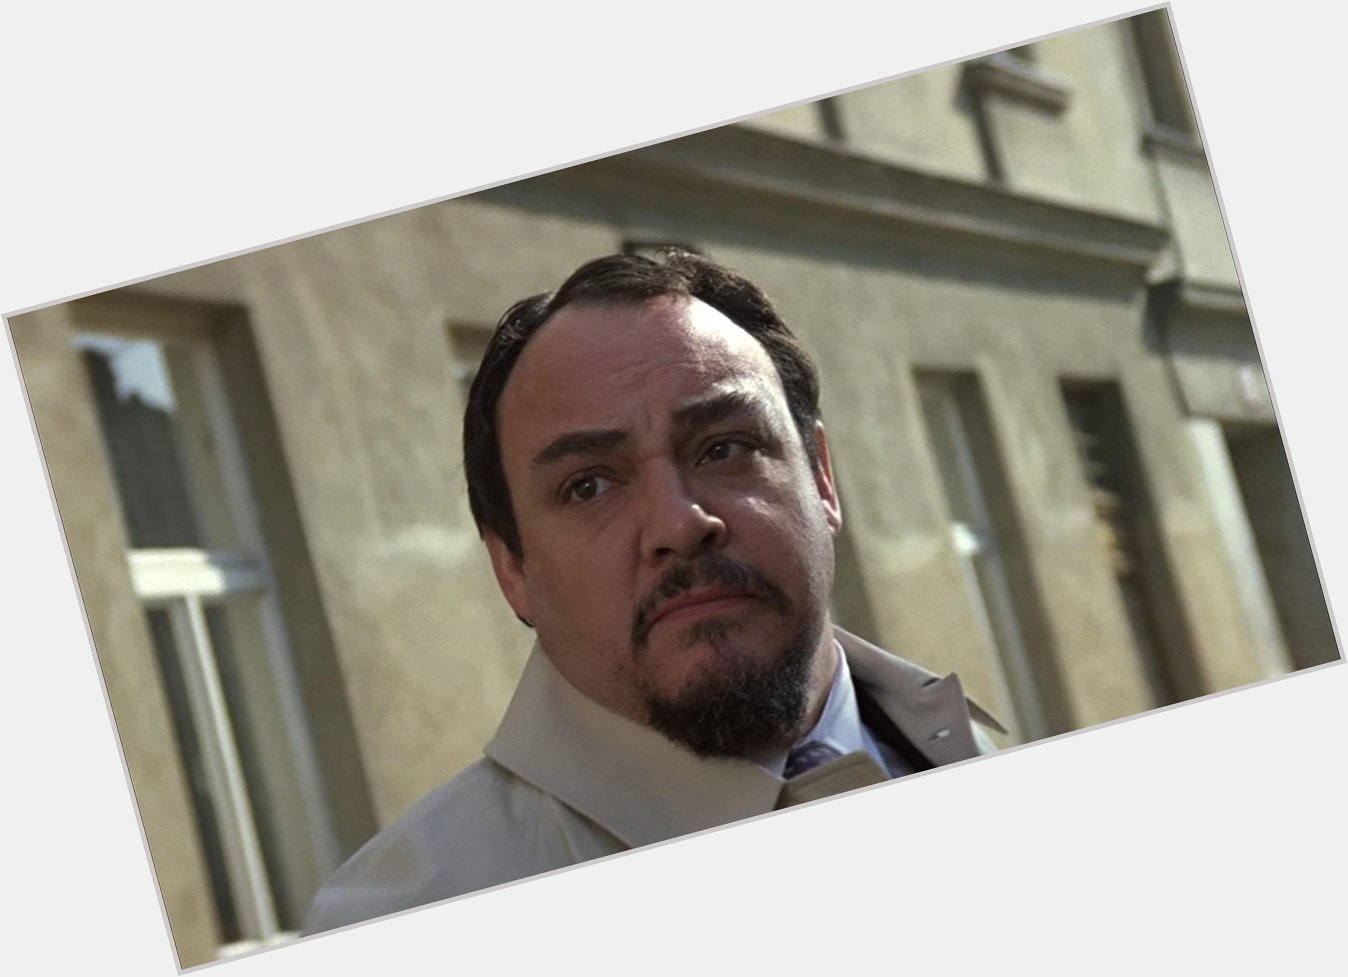 Happy 76th birthday John Rhys-Davies! Hope you have some nice social calls today... 